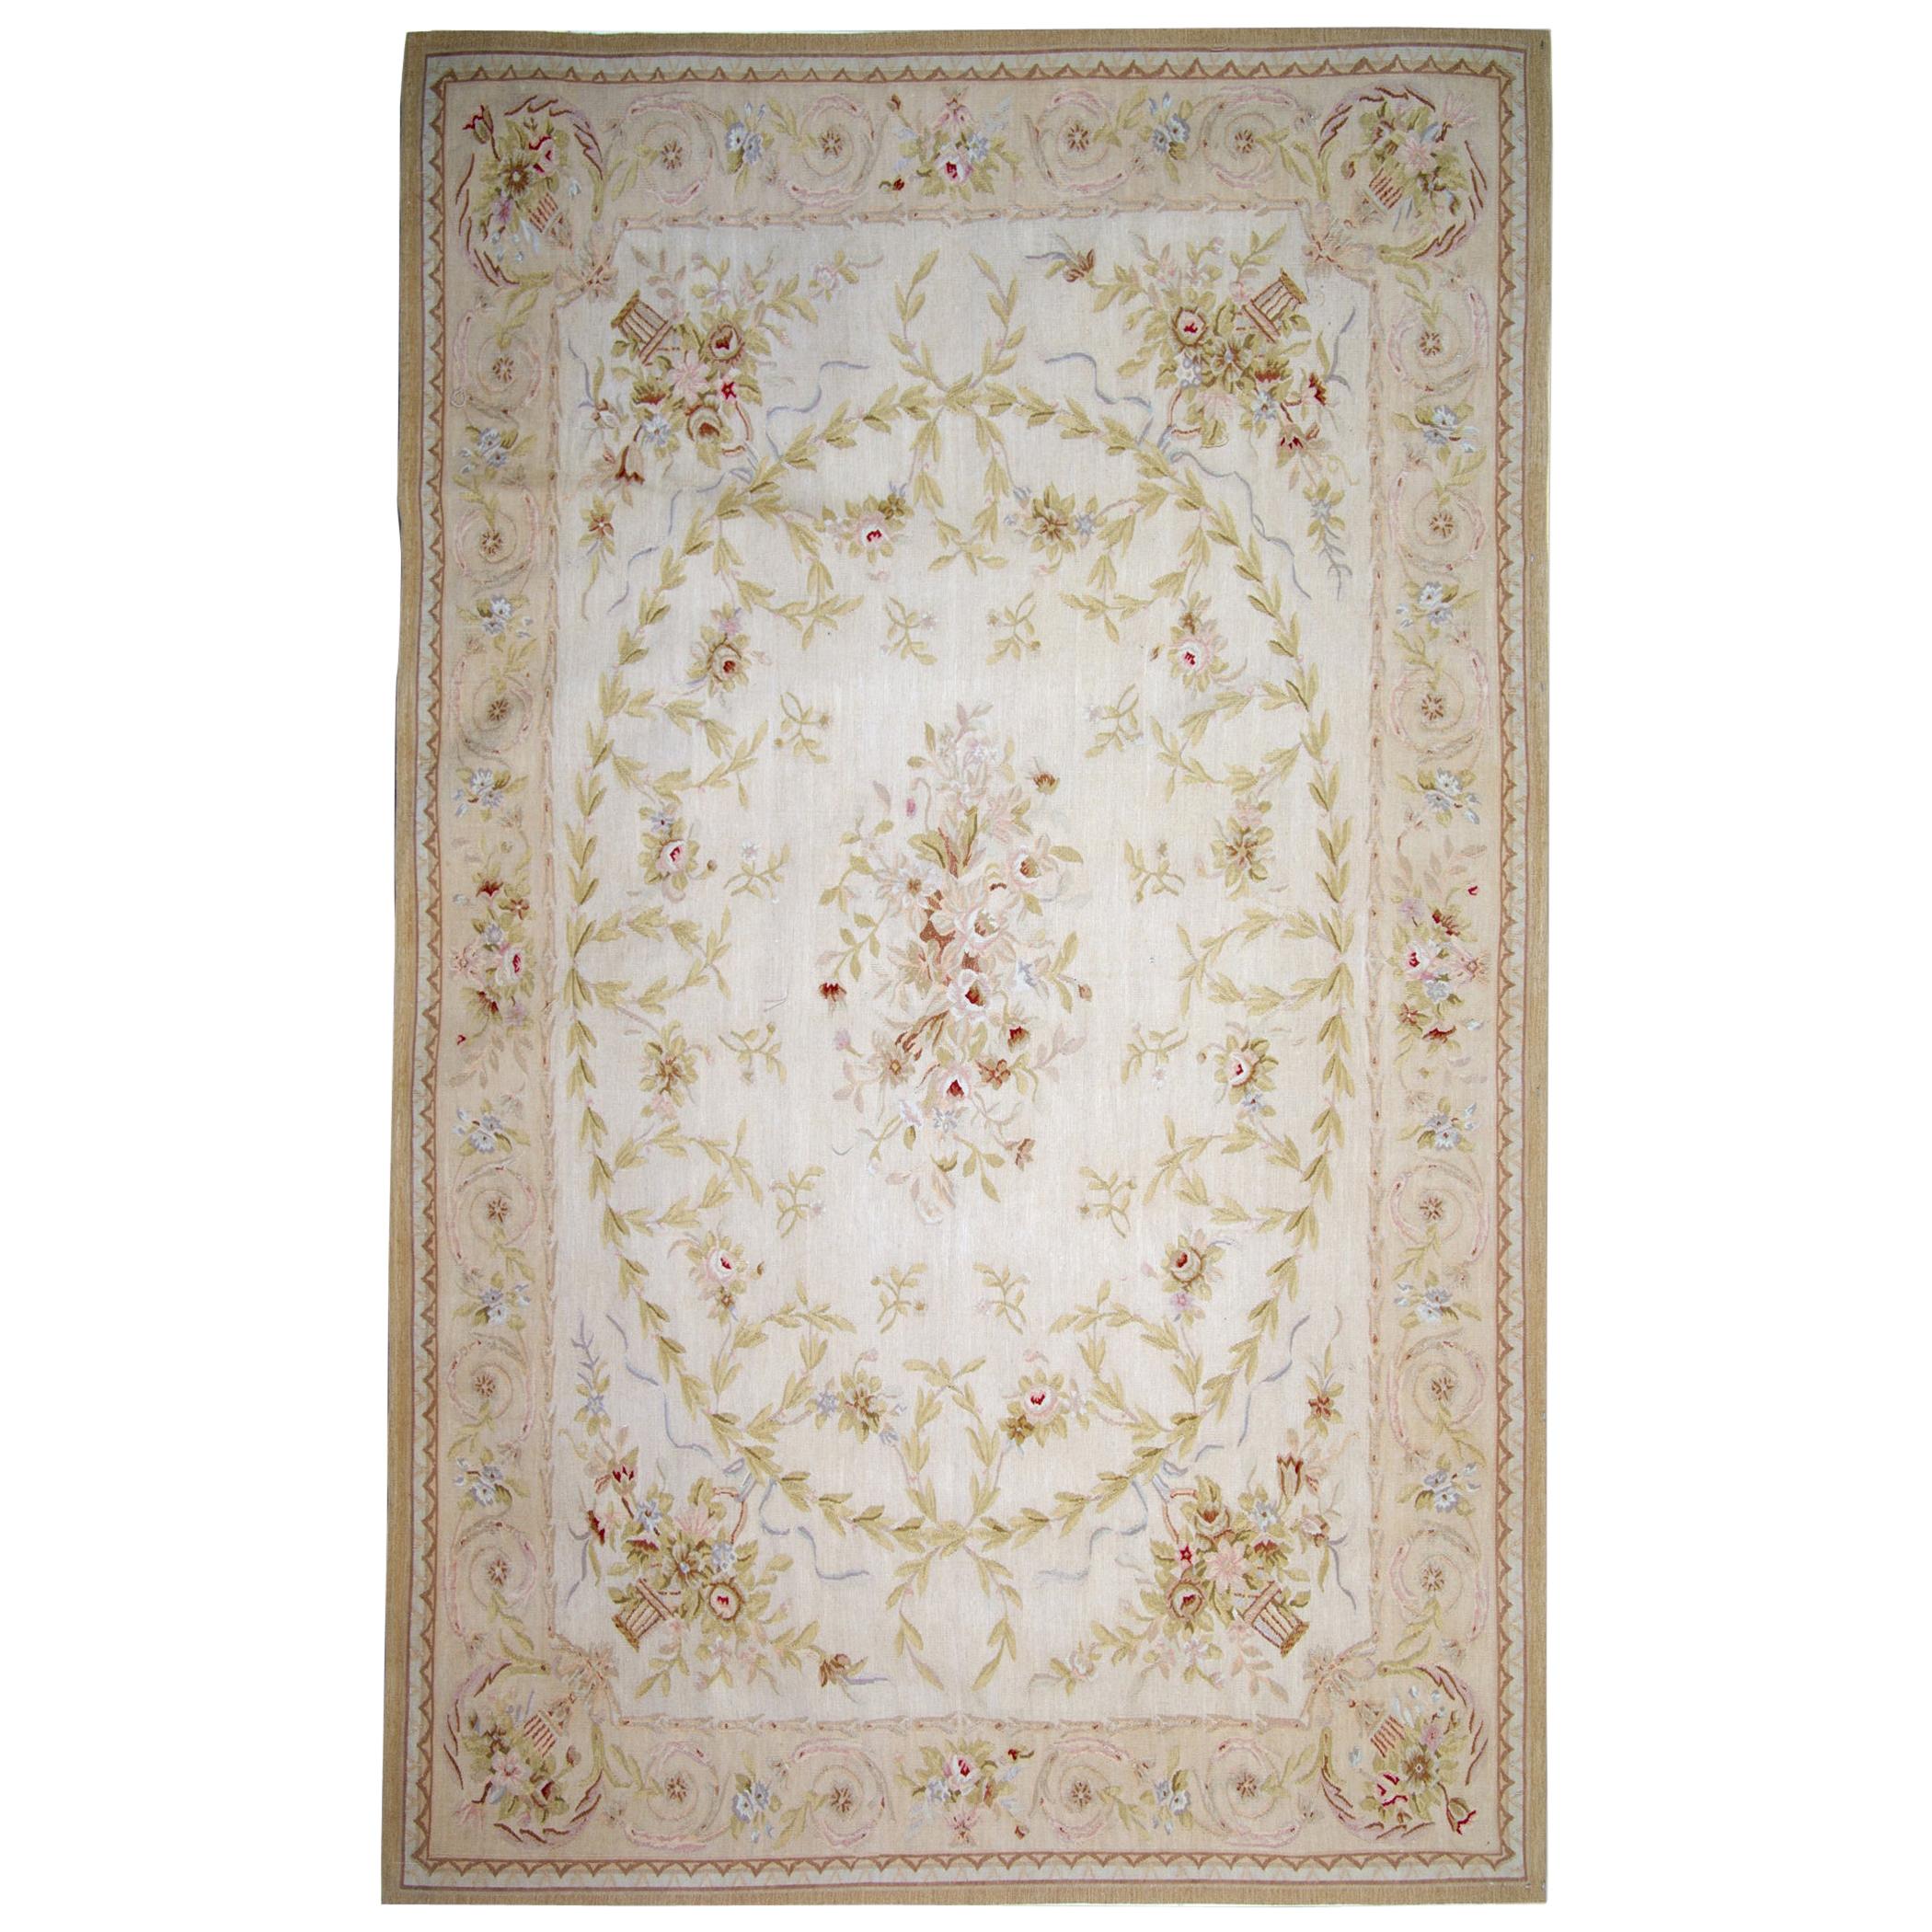 Aubusson Style Rug Tapestry Area Rug Wool Traditional Needlepoint